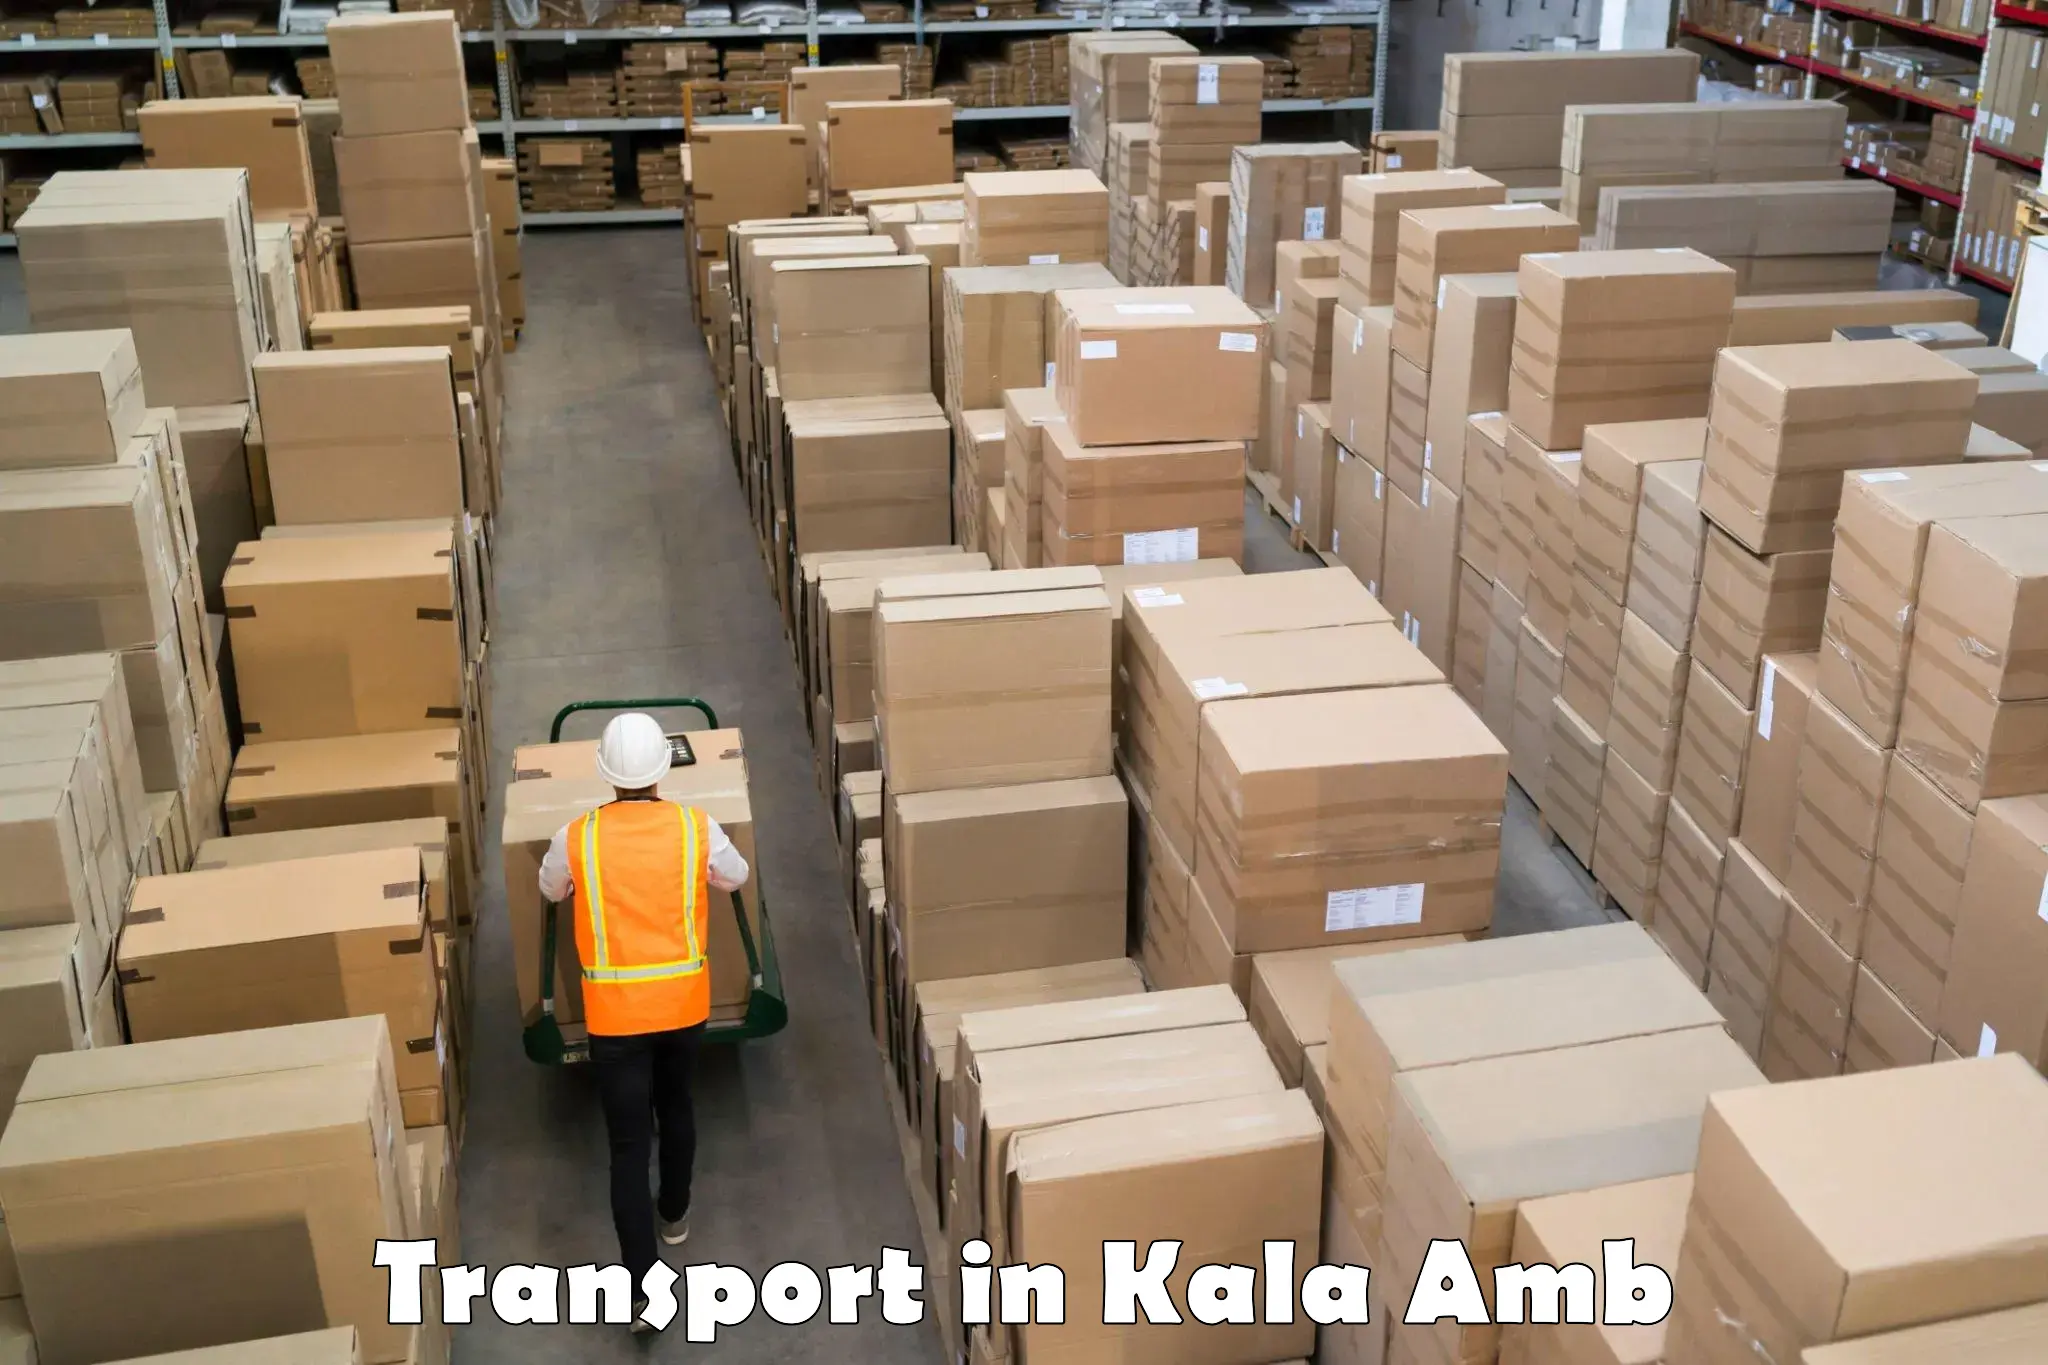 Air cargo transport services in Kala Amb